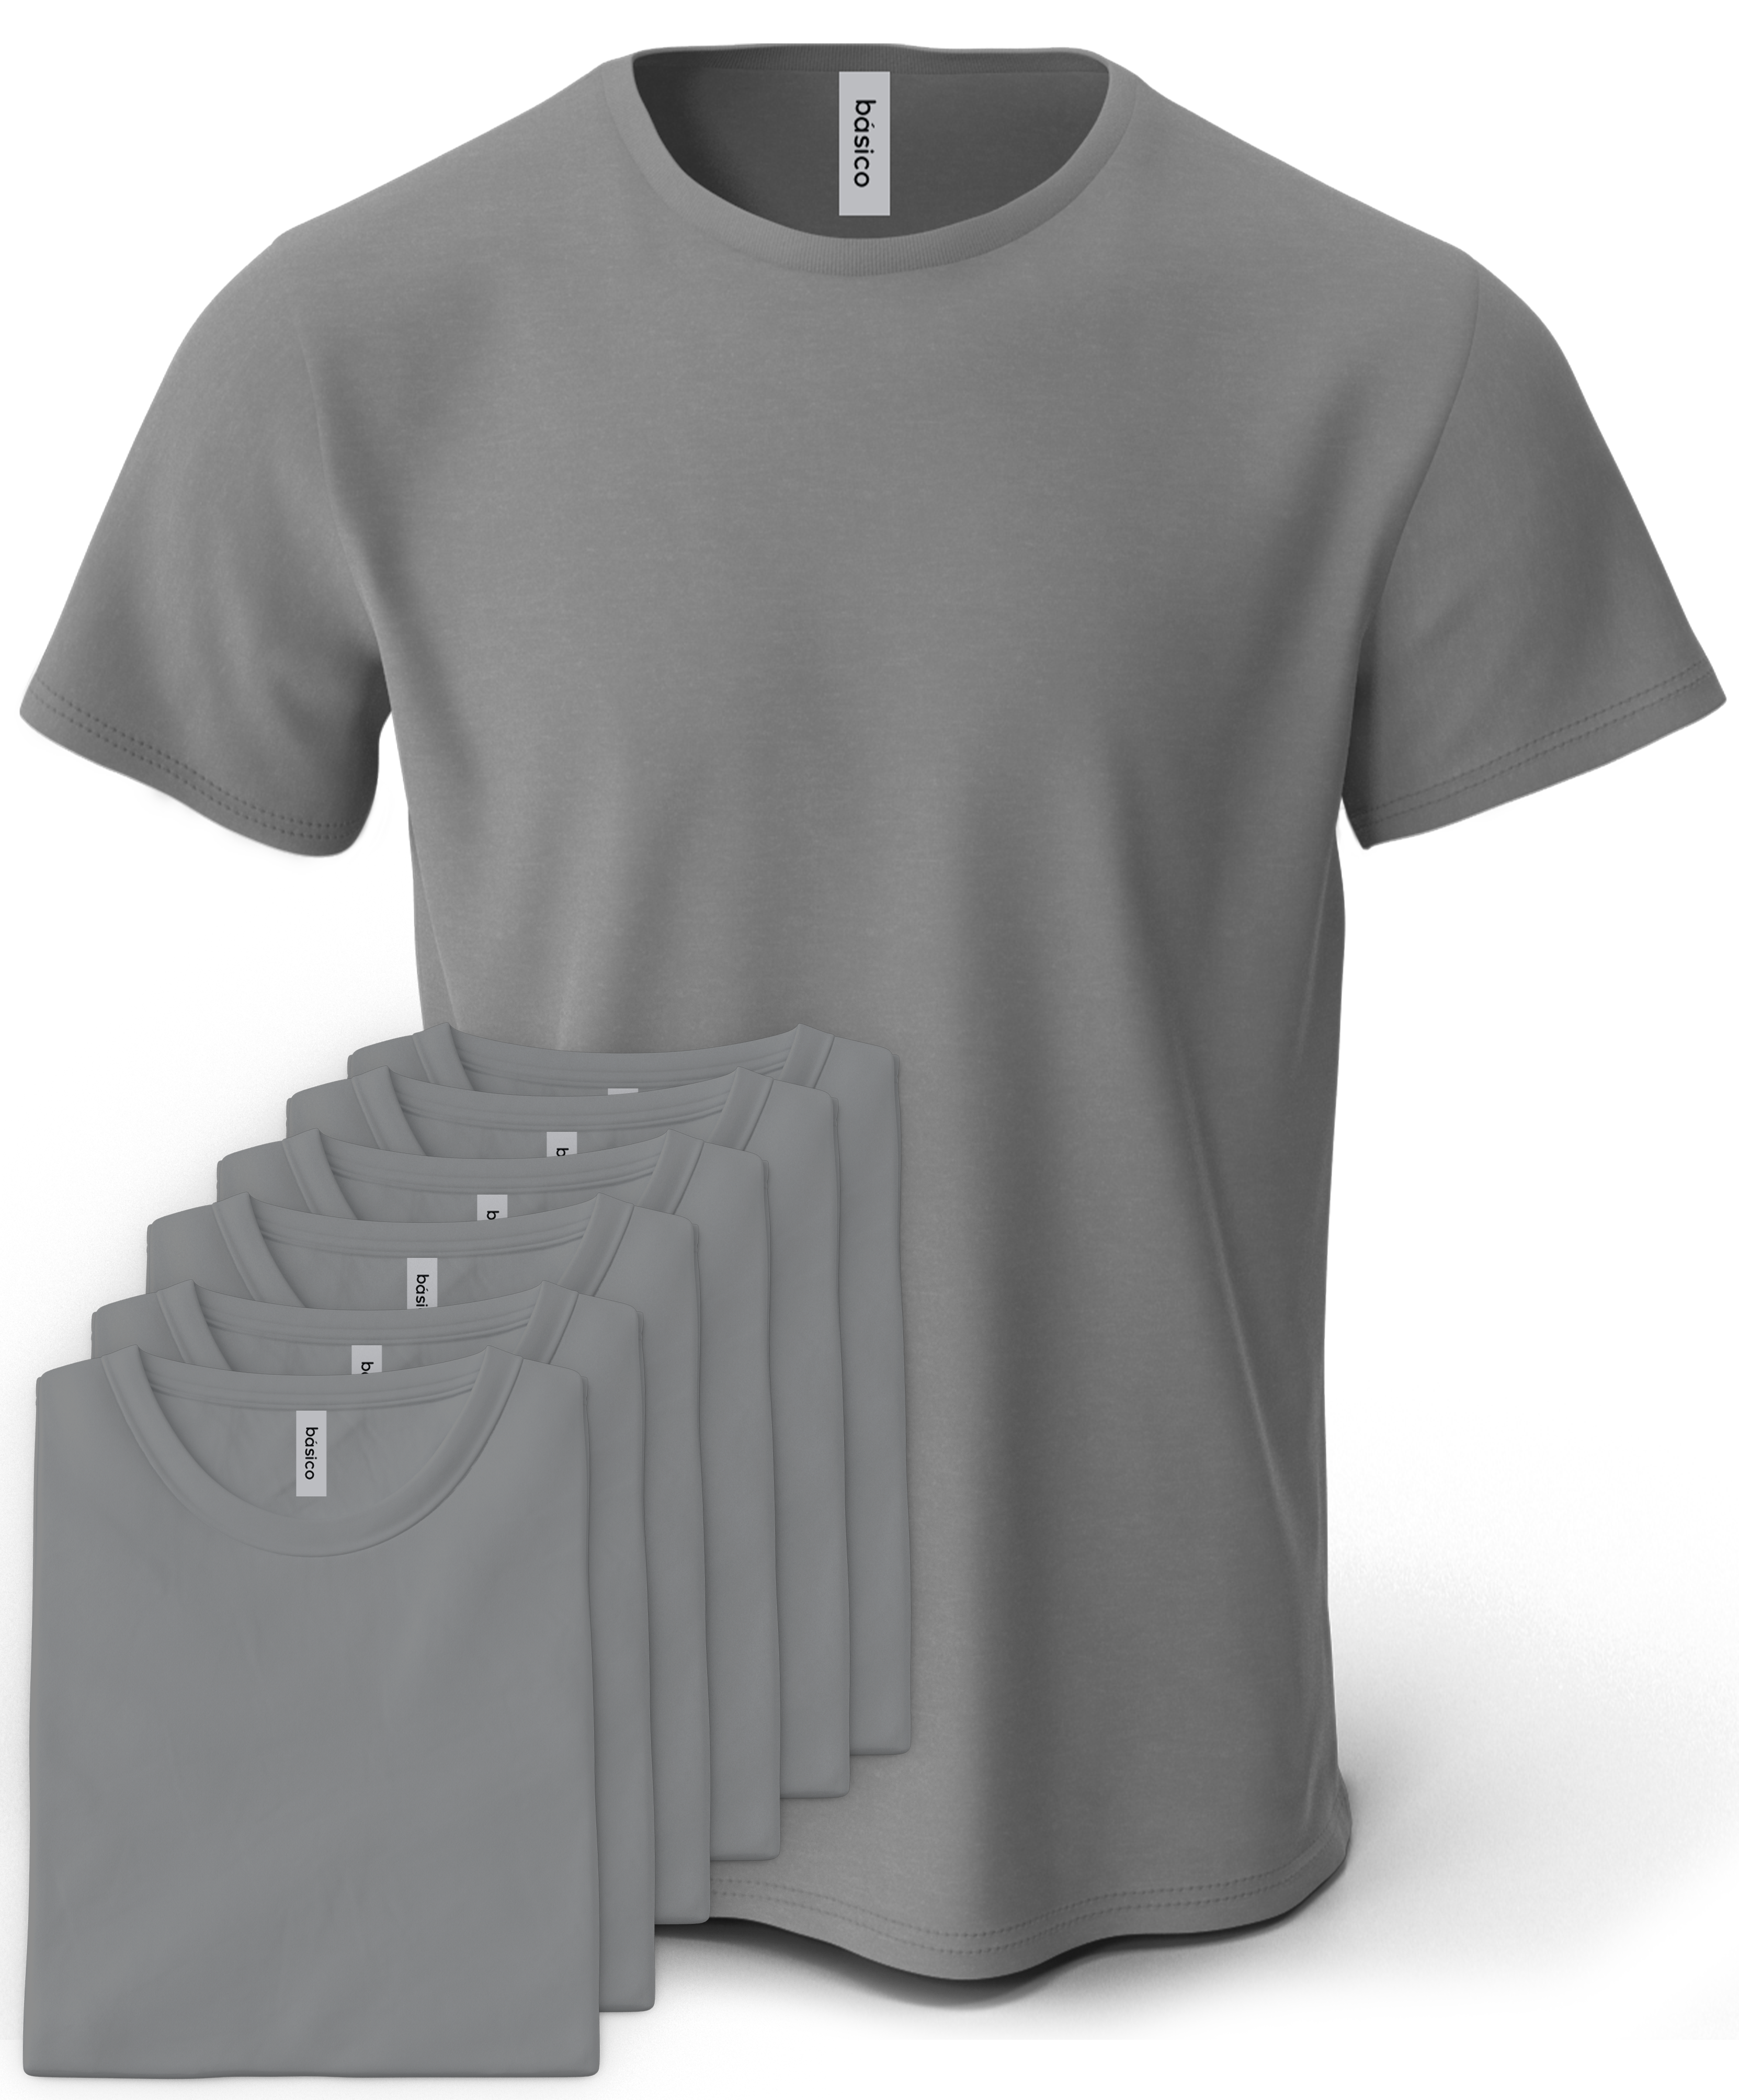 Grey Plain Classic Breathable Soft 100% Cotton Unisex Crew Neck Casual T shirts (6 Pack) Basico Apparel